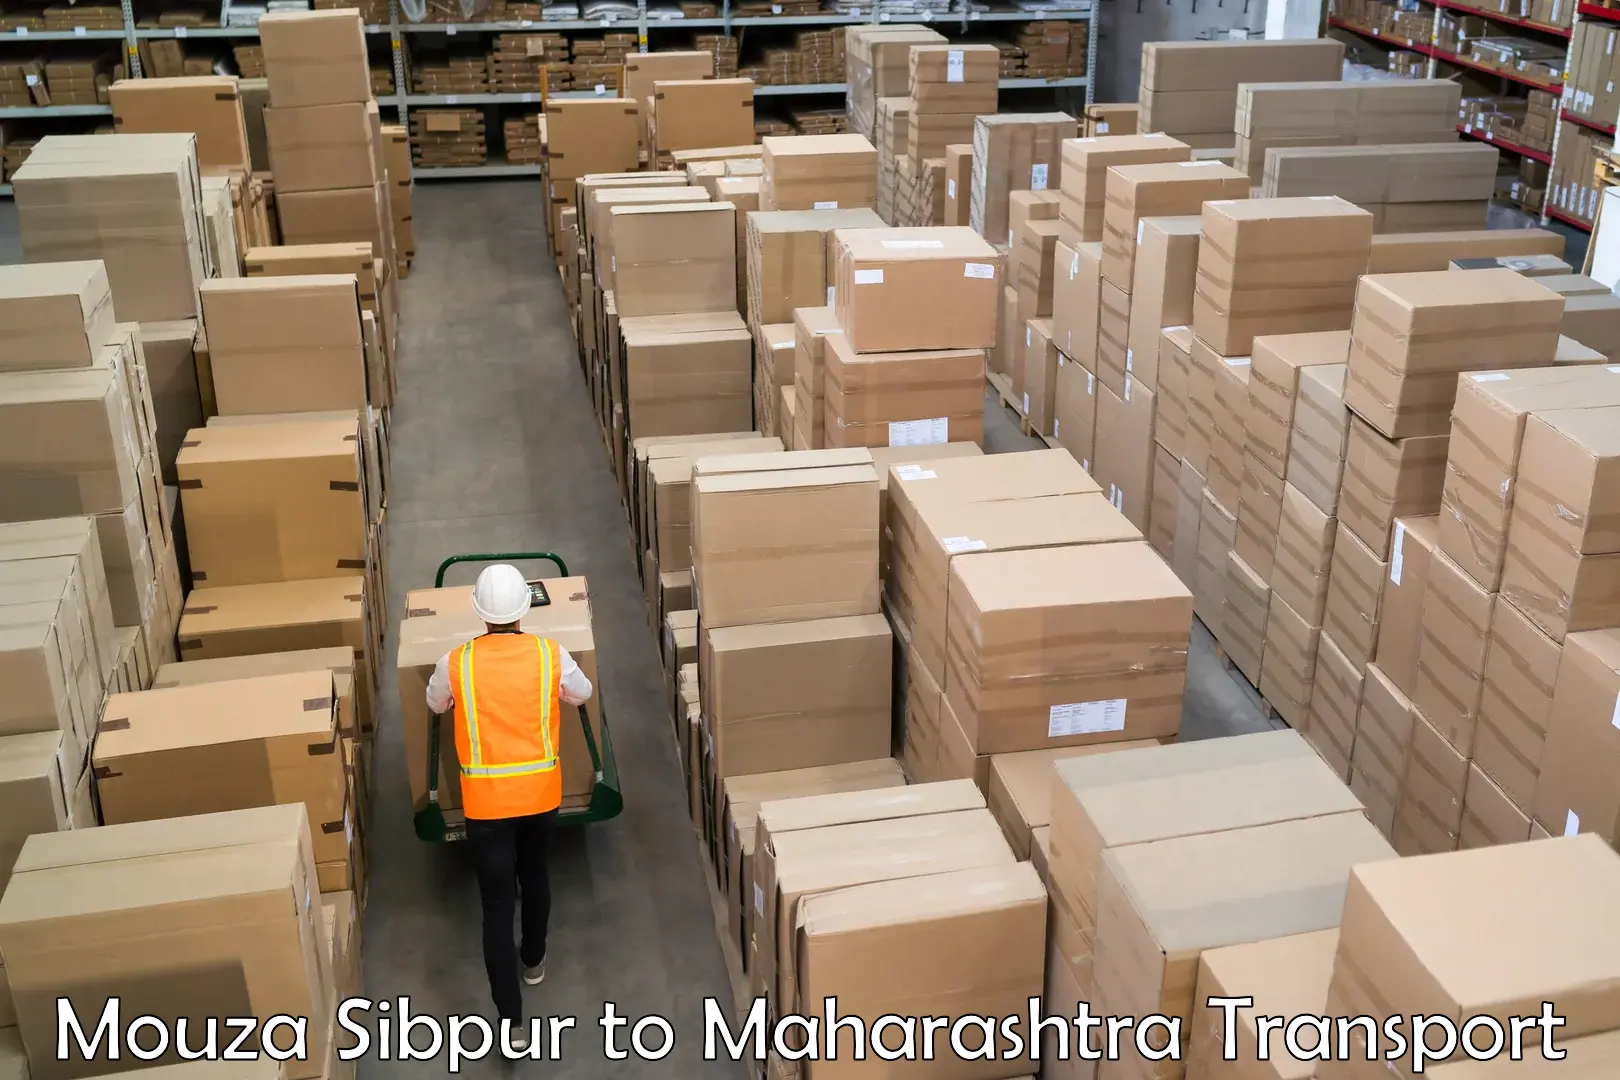 Air freight transport services Mouza Sibpur to Chalisgaon